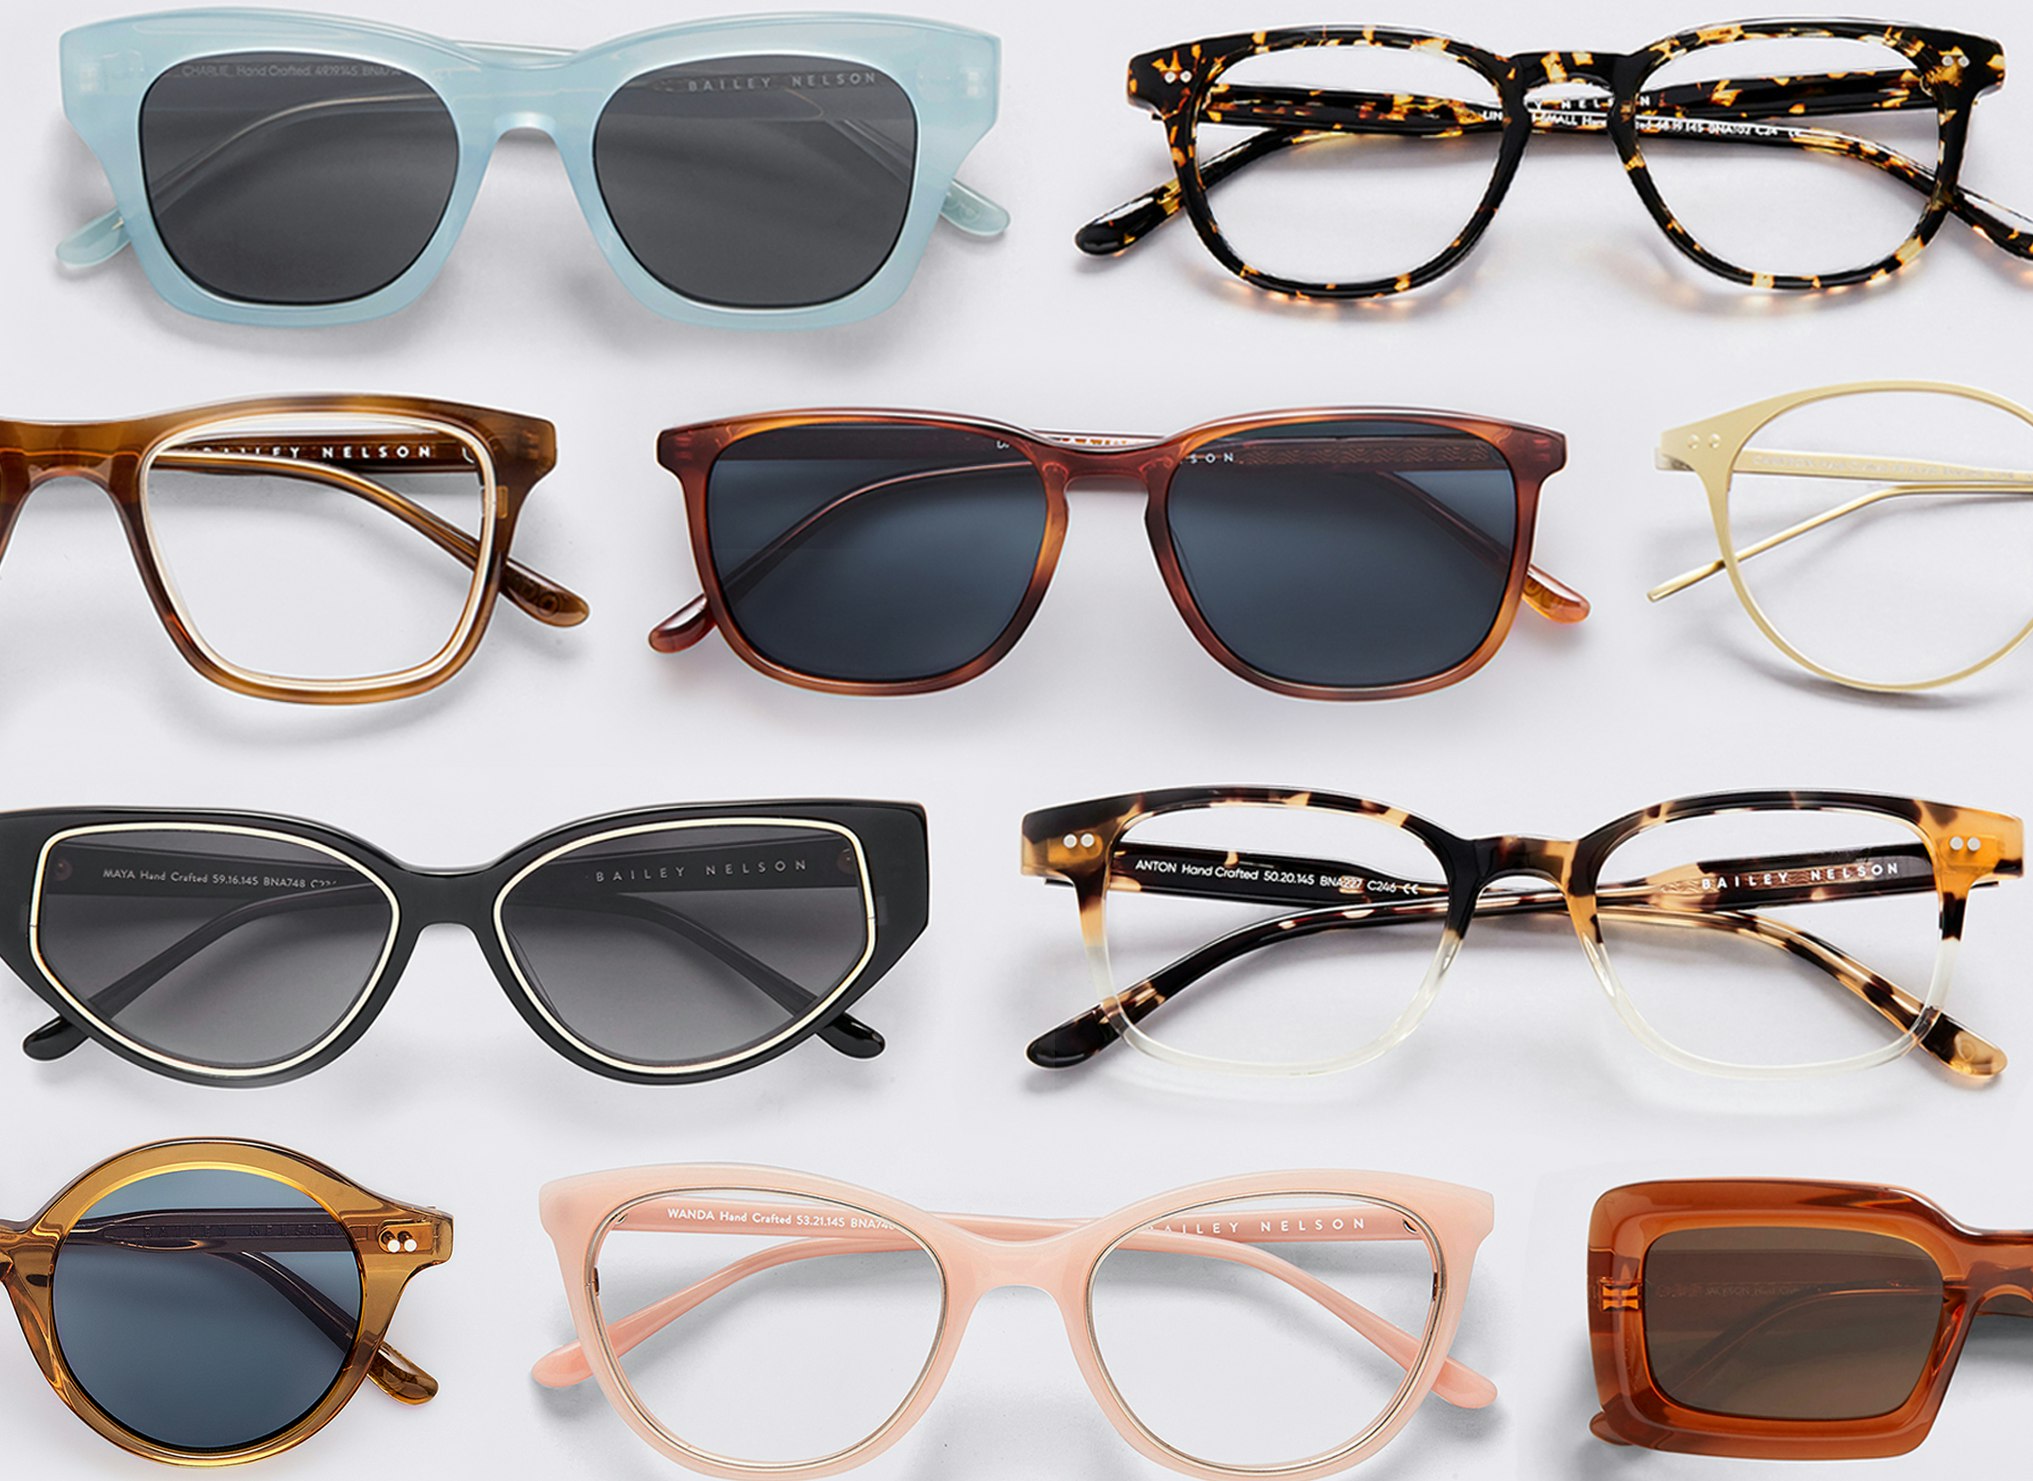 optical and sunglasses on sale for Bailey Nelson